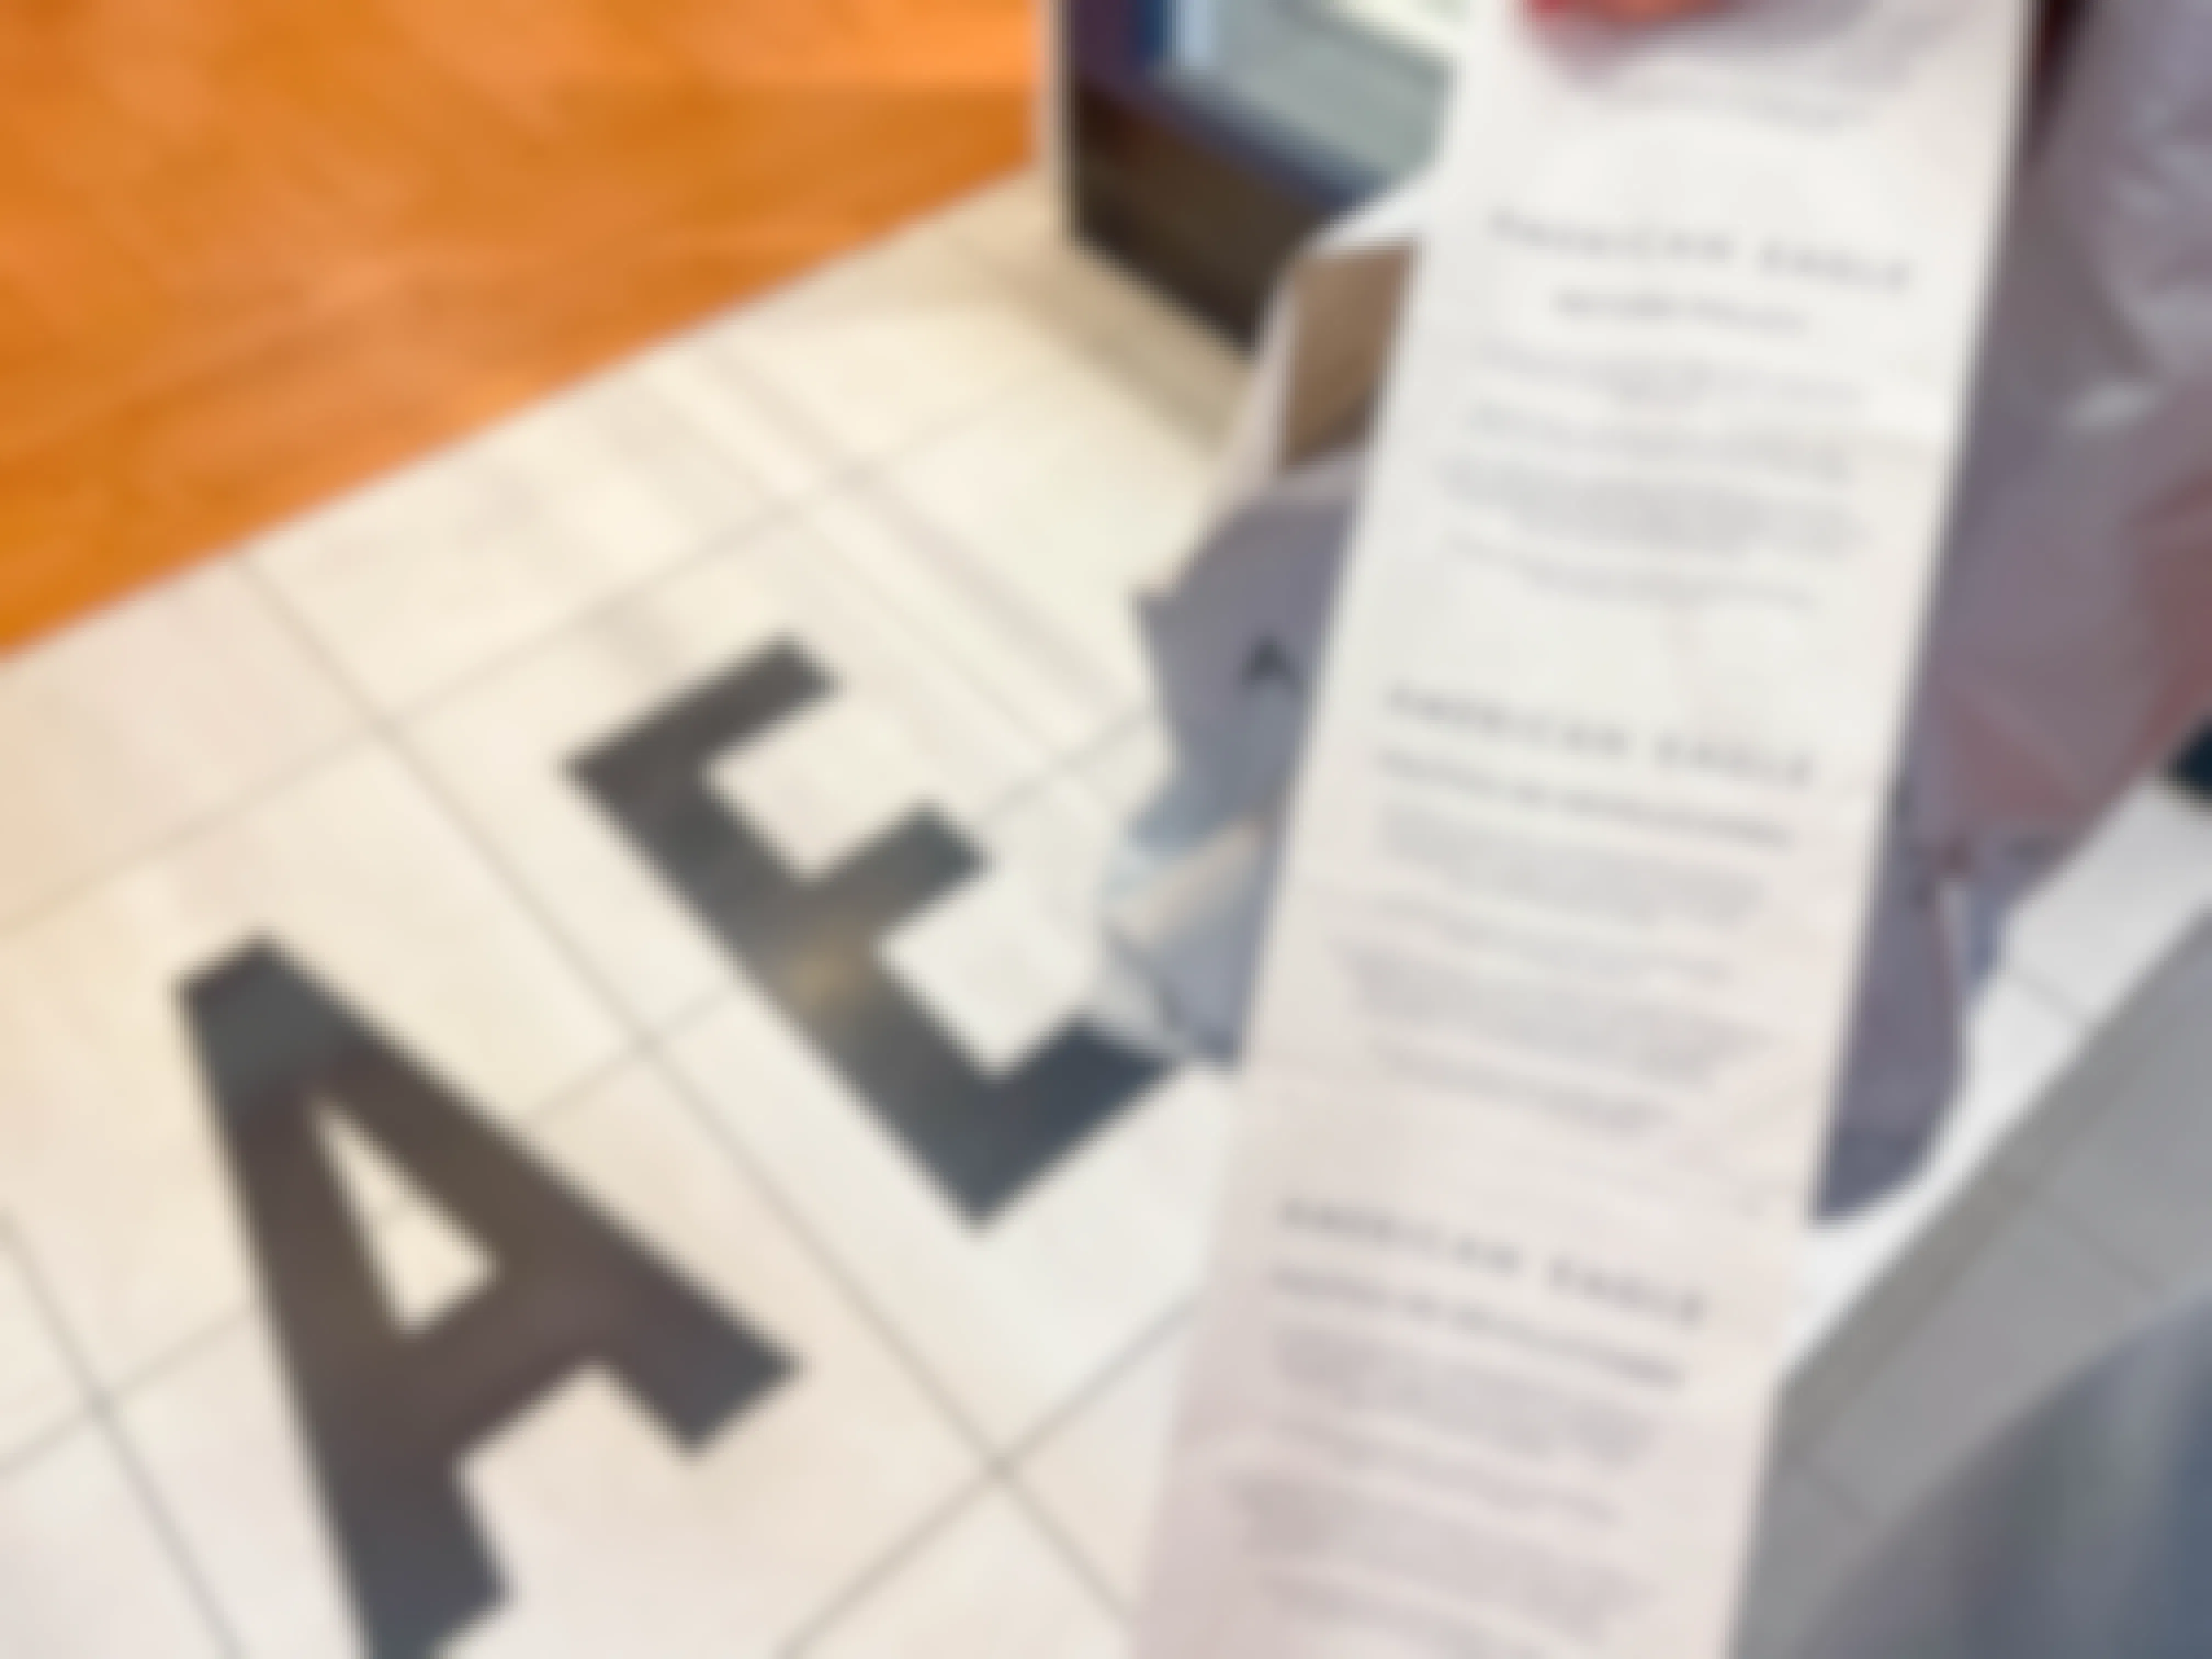 An American Eagle receipt being held showing the return policy on the back in the store entrance